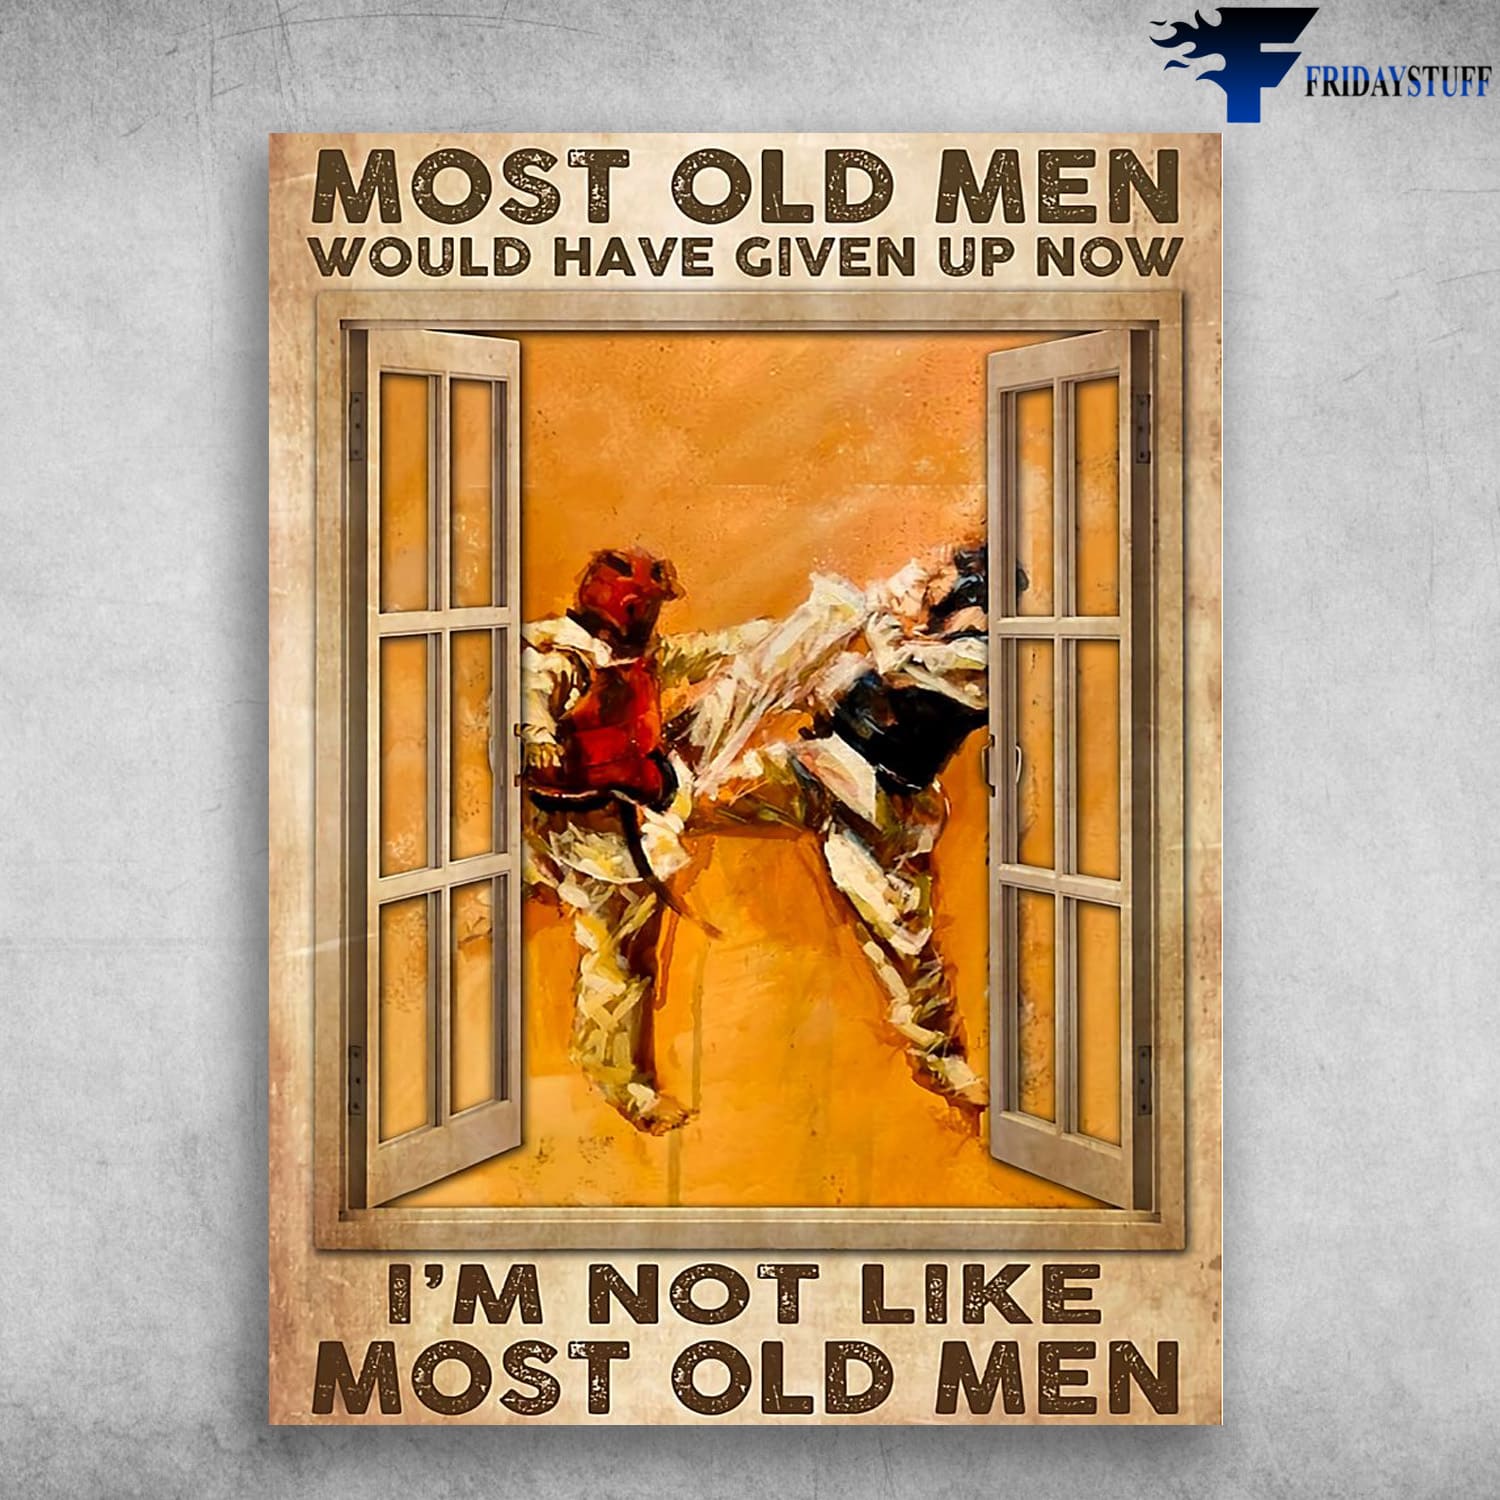 Taekwondo Poster, Window Decor, Most Old Men, Would Have Given Up Now, I'm Not Like Most Old Men